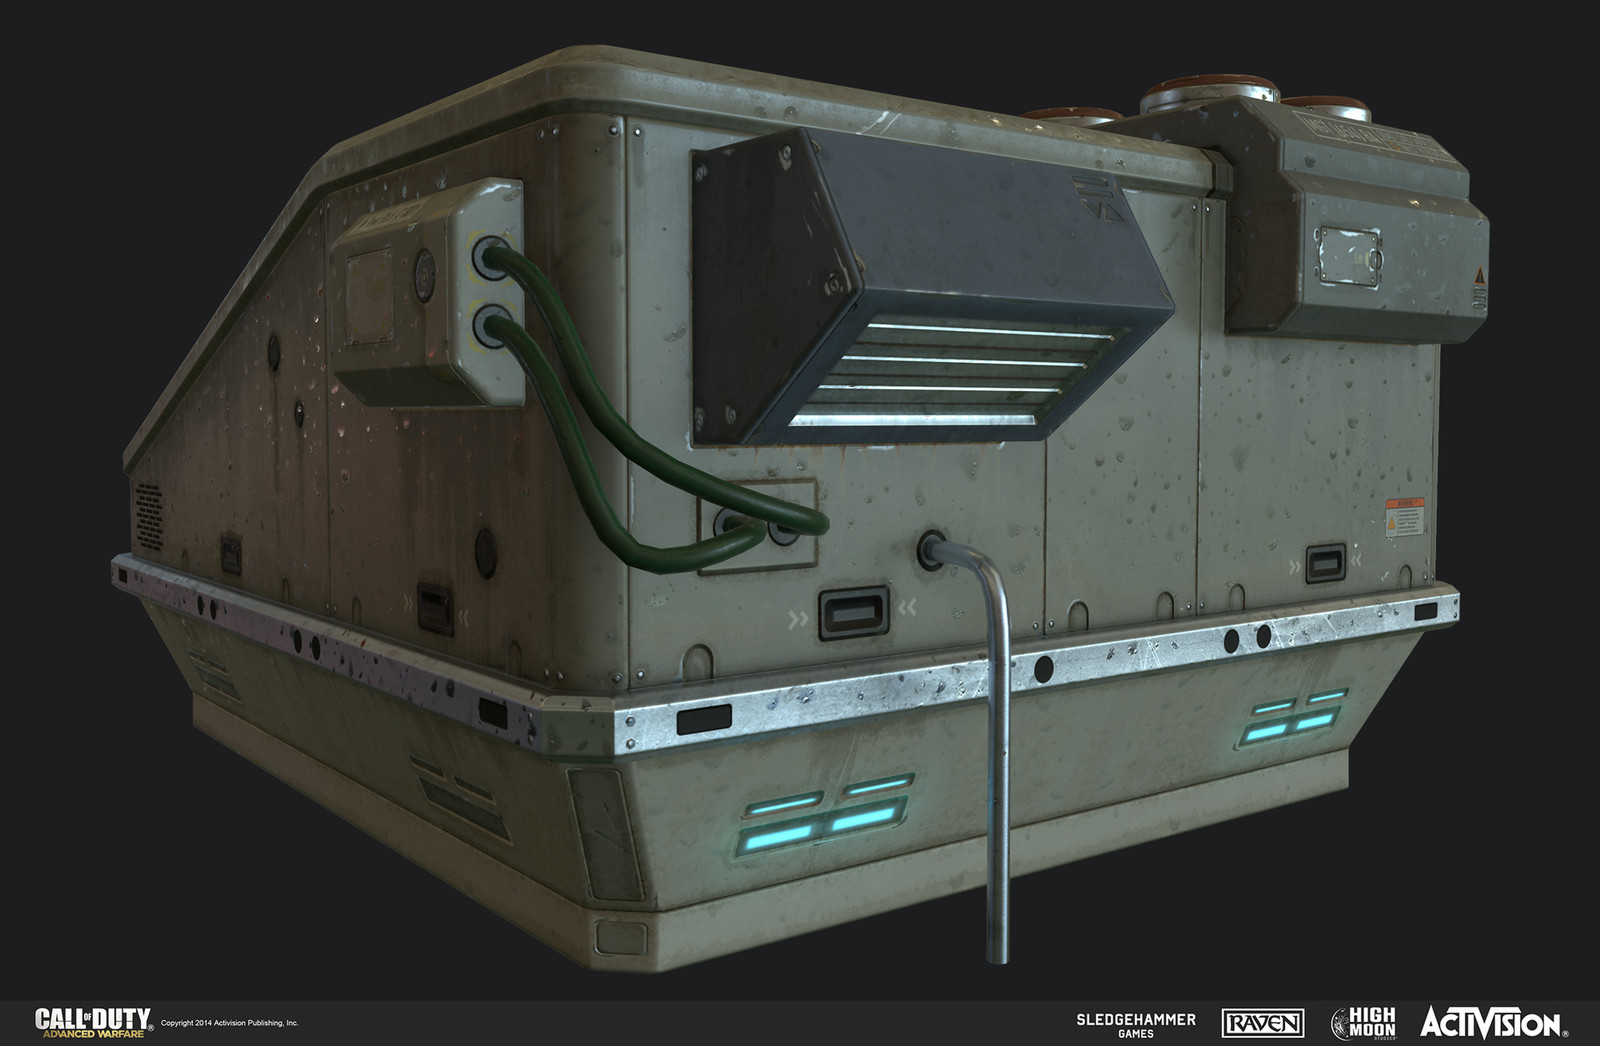 Created "air conditioner" prop for use in "Sentinel' map. Maya used for high / low poly modeling. Photoshop in conjunction with Quixel Suite and hand authored methods for material finish.